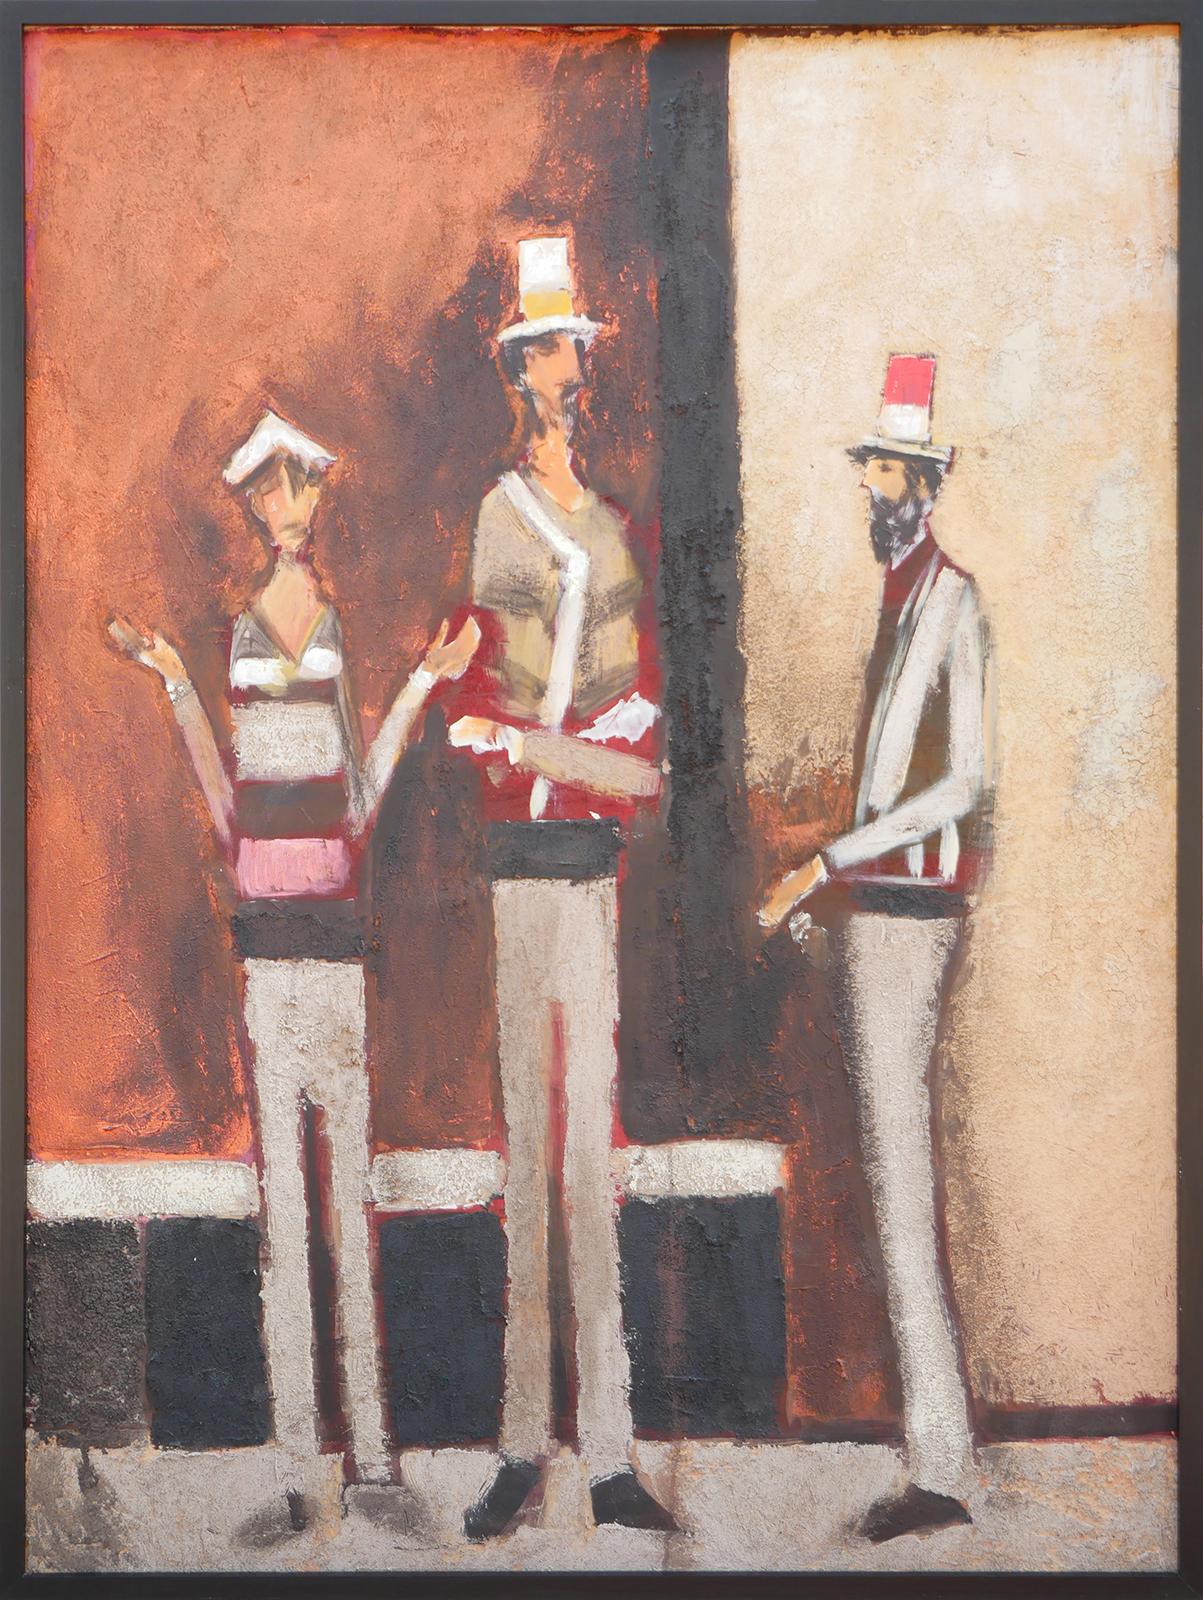 Modern abstract figurative portrait painting by Houston, TX artist David Adickes. The work features a central group of three male figures wearing hats set against a neutral toned background. Currently hung a decorative black frame.

Dimensions